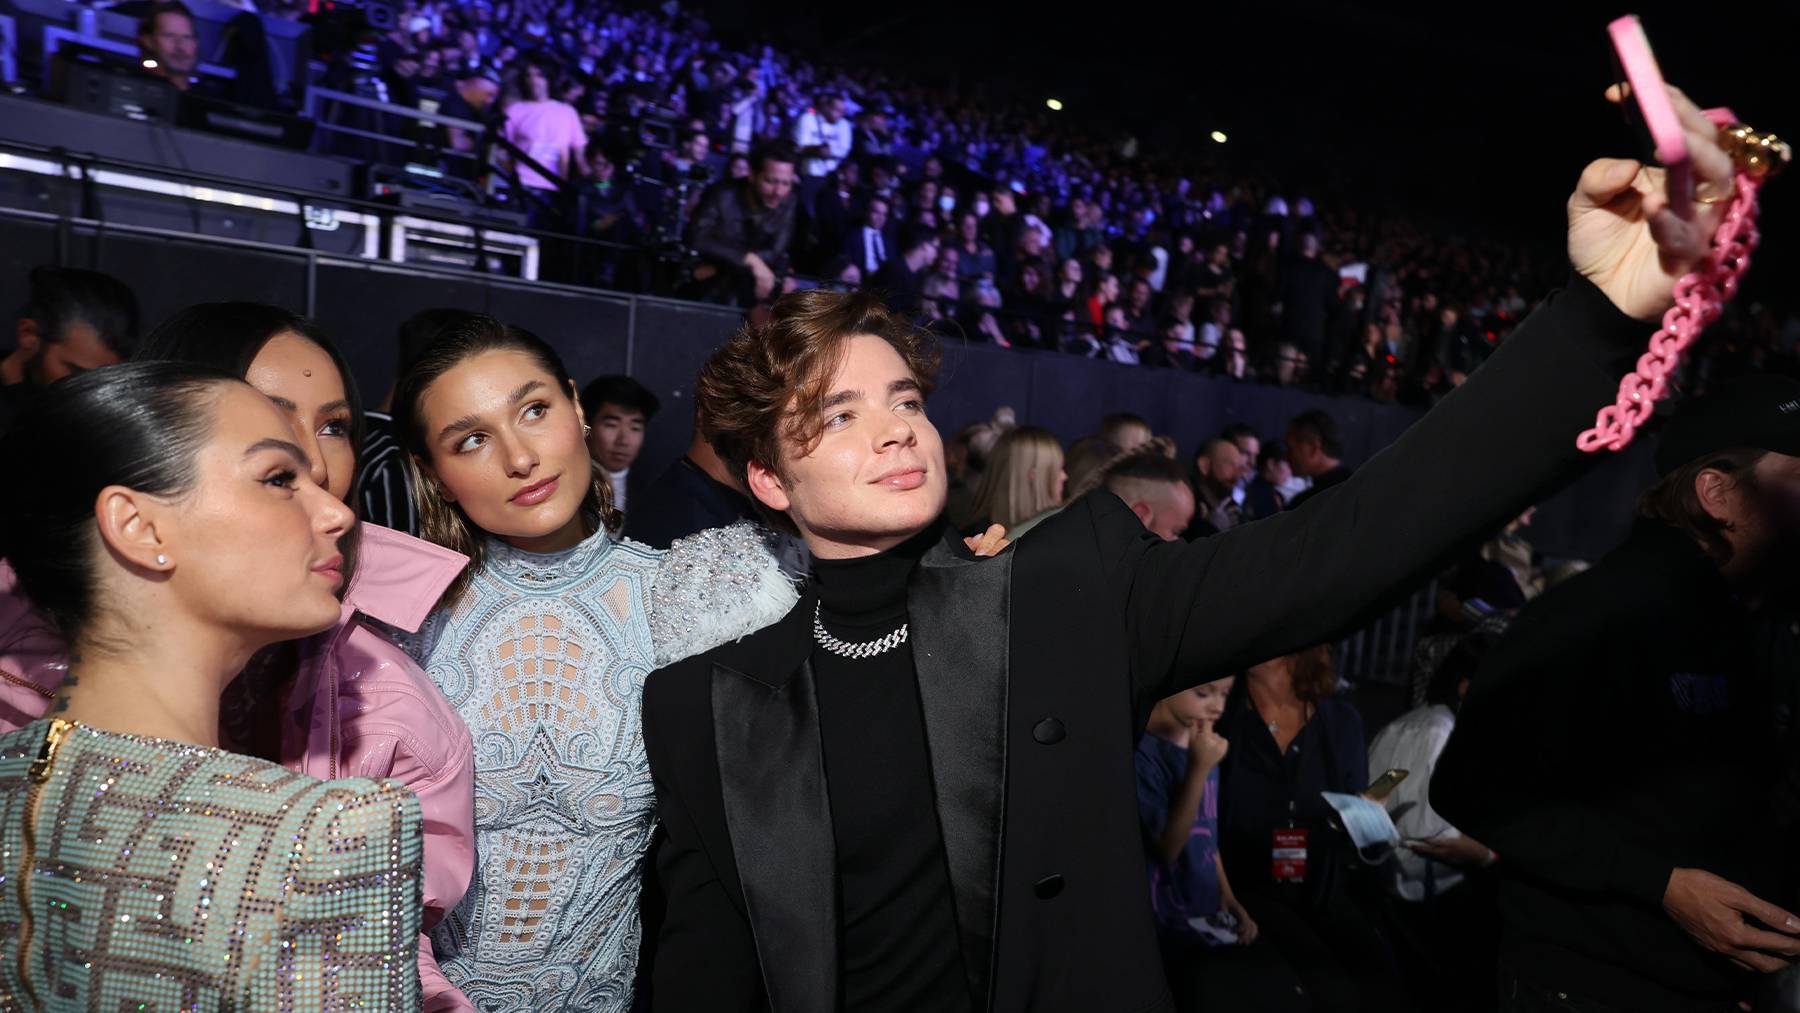 VIP guests including model Sasha Meneghel and singer João Figueiredo pose for a selfie at Balmain's festival during Paris Fashion Week. Getty Images.